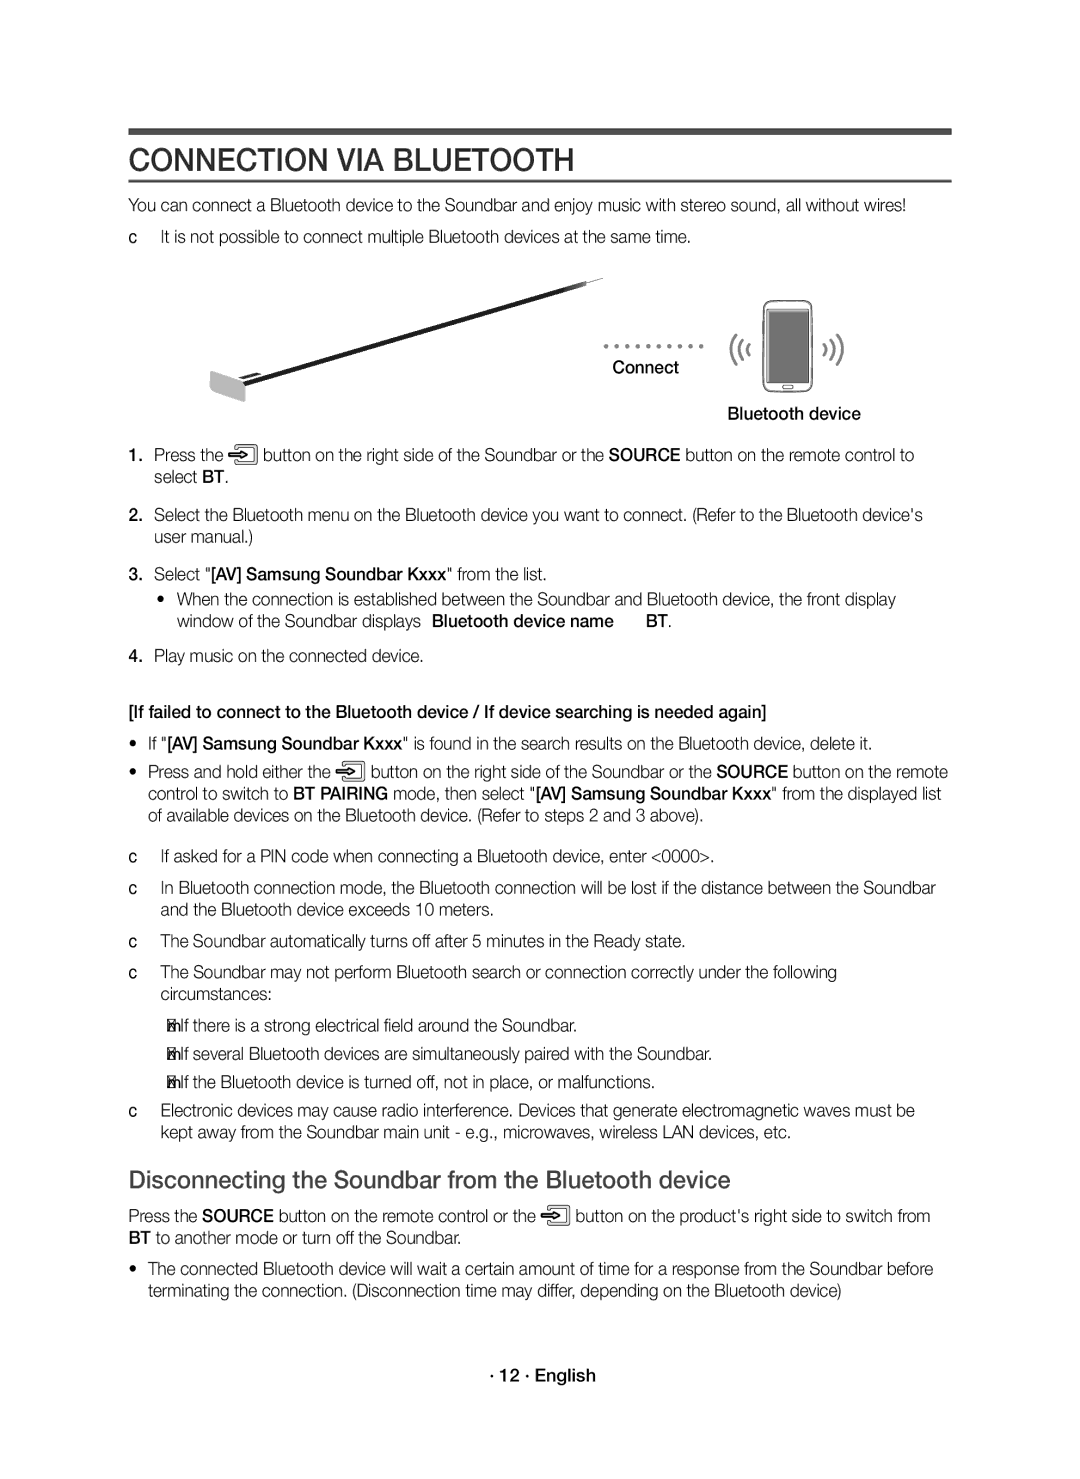 Samsung HW-K950/XV manual Connection VIA Bluetooth, Disconnecting the Soundbar from the Bluetooth device, · 12 · English 